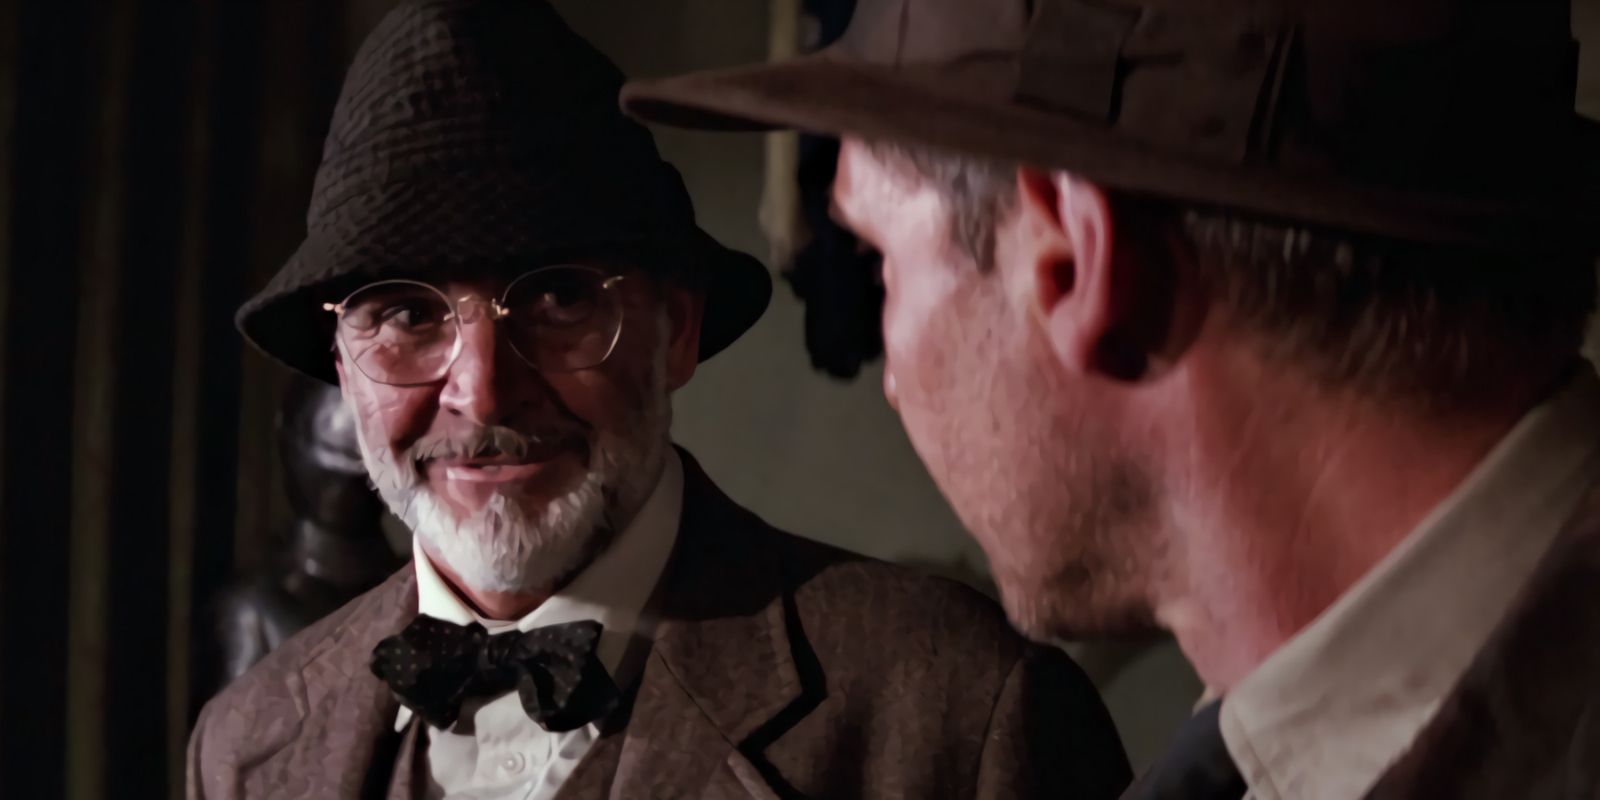 Sean Connery in Indiana Jones and the Last Crusade.